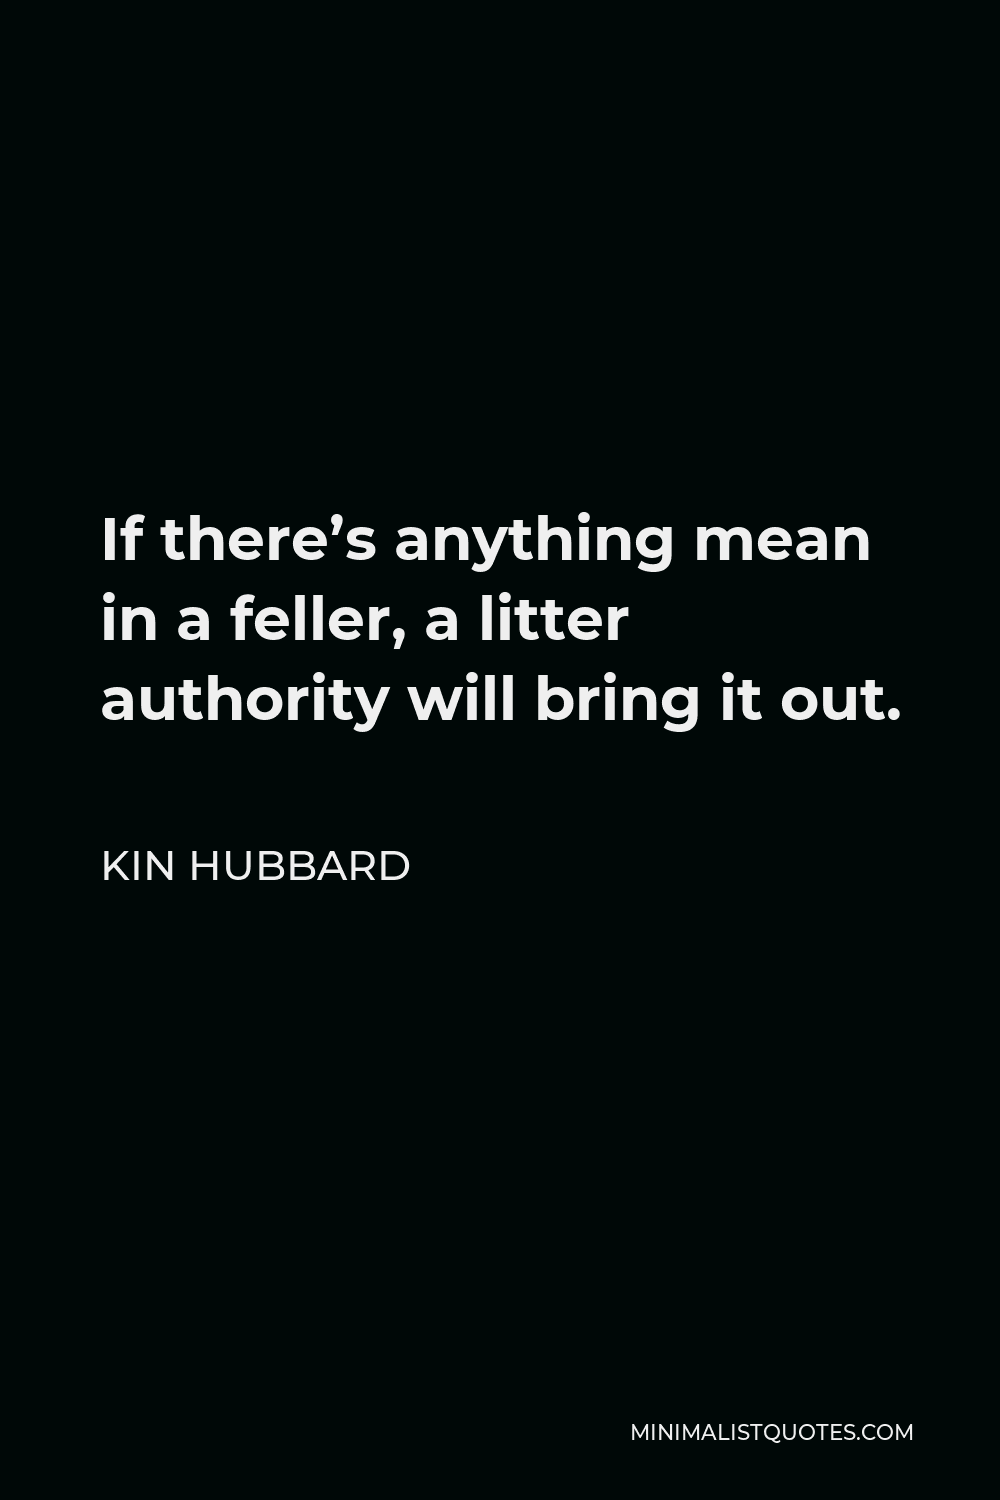 Kin Hubbard Quote - If there’s anything mean in a feller, a litter authority will bring it out.